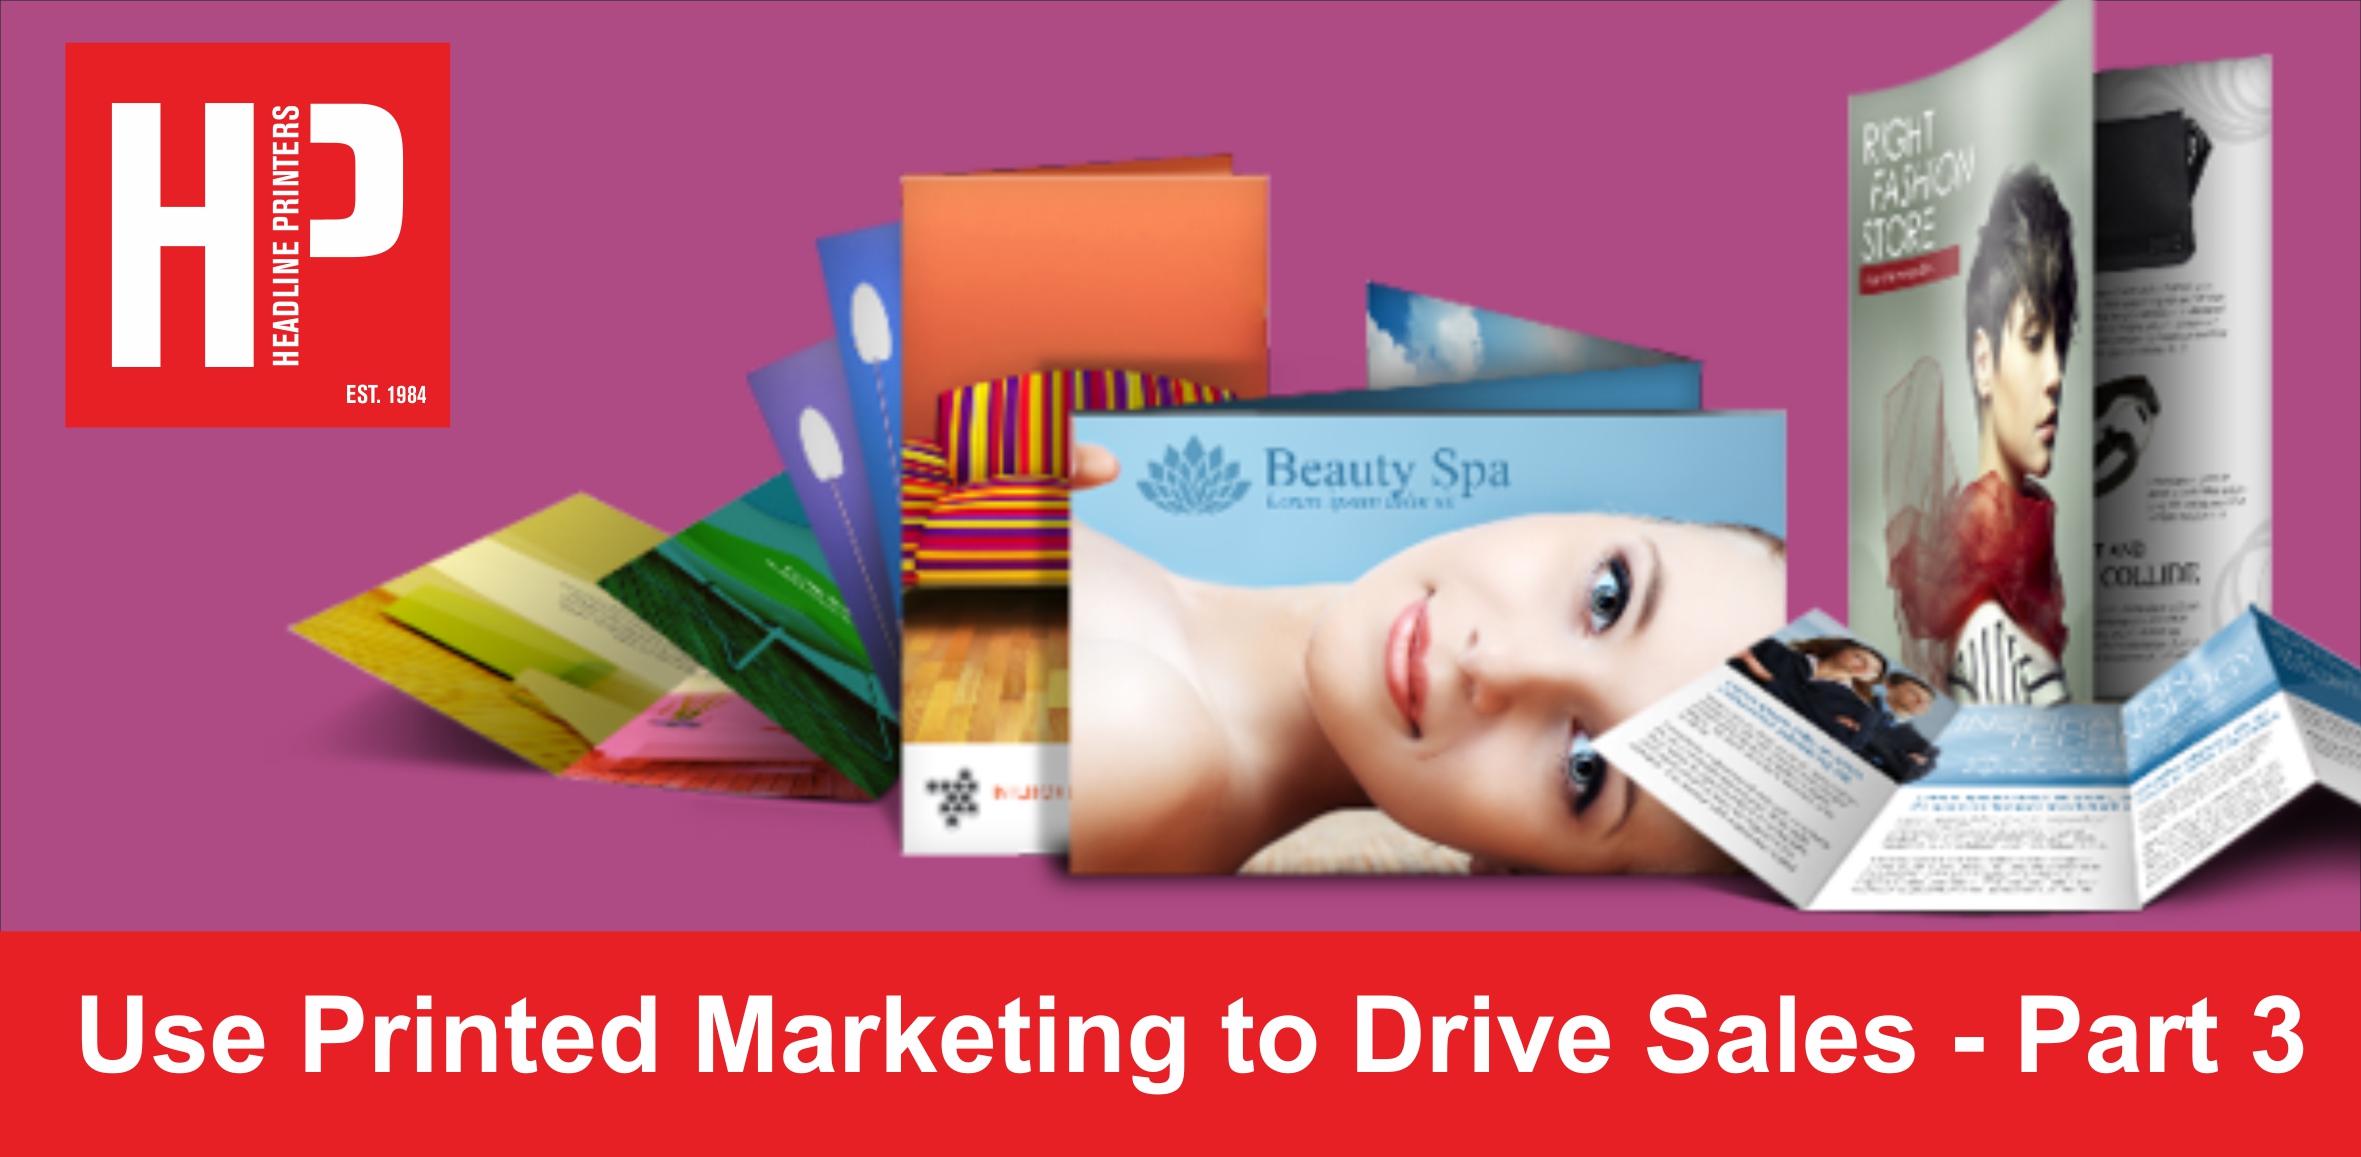 Use Printed Marketing to Drive Sales - Part 3